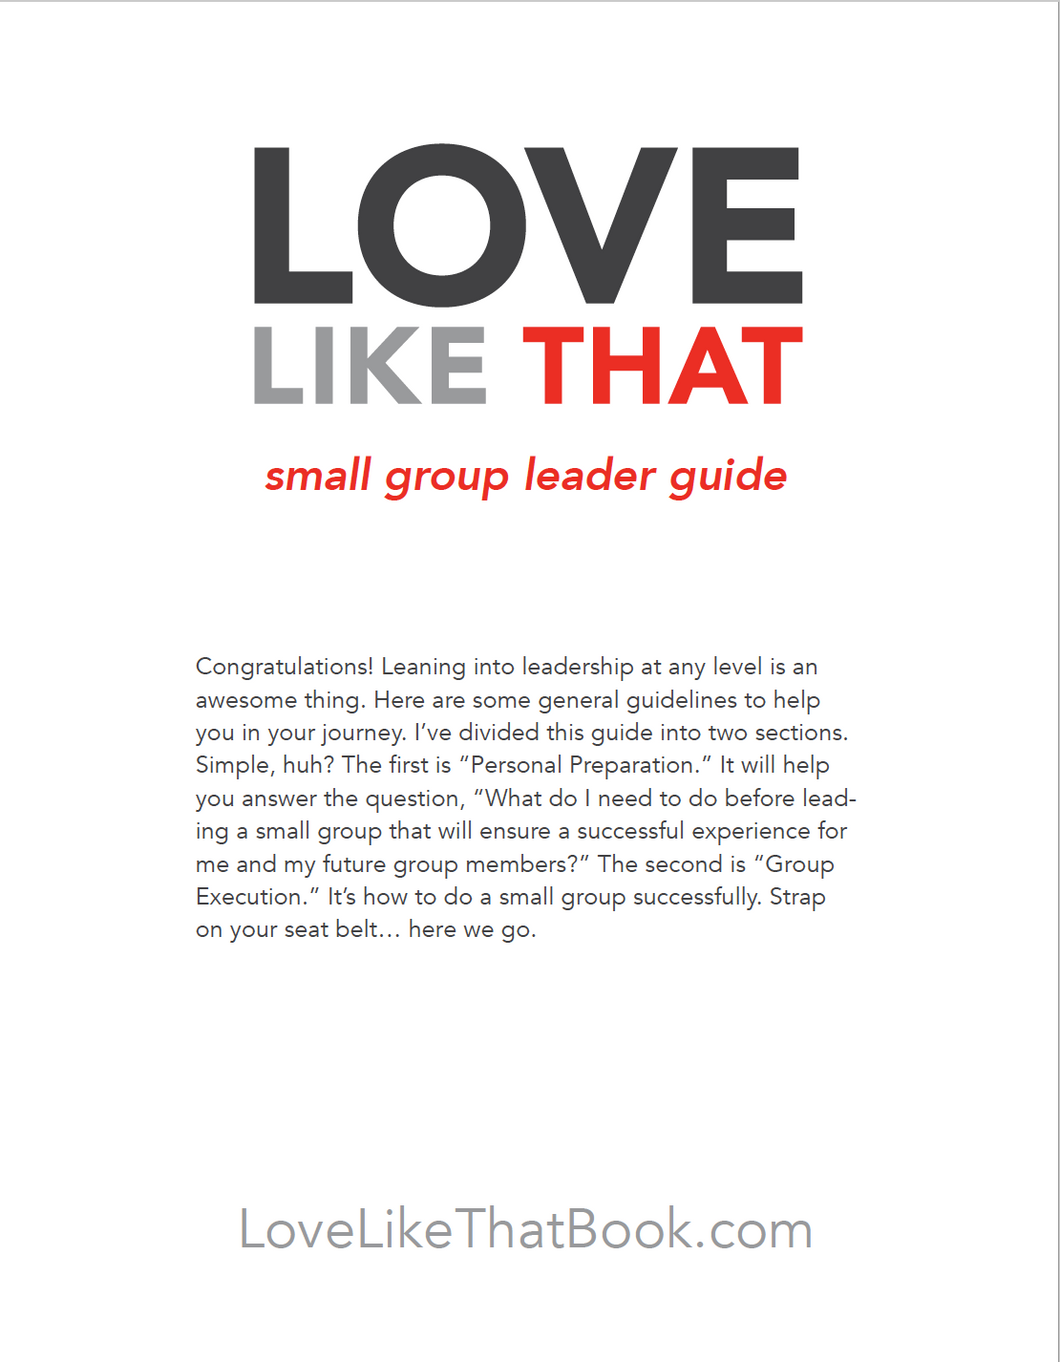 Small Group Leader's Guide